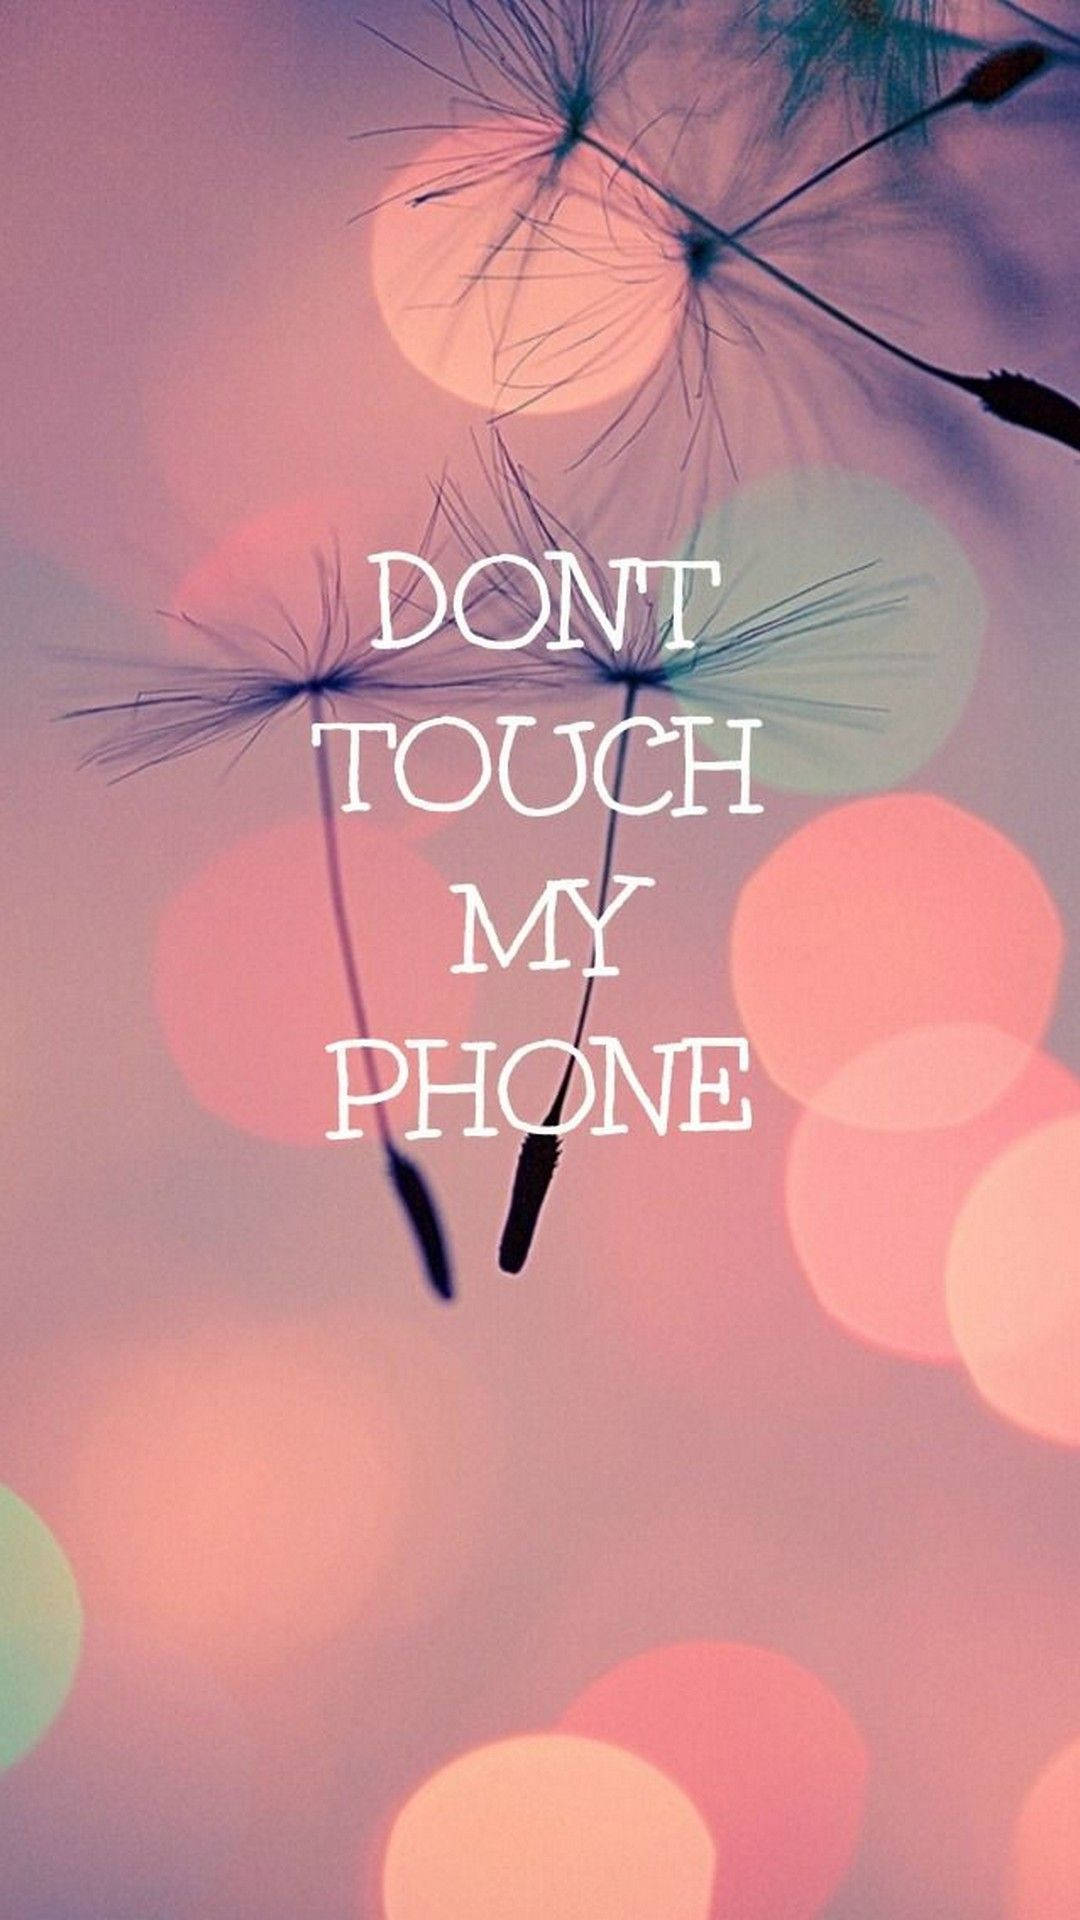 Download Watch Out! Don't touch my phone! Wallpaper